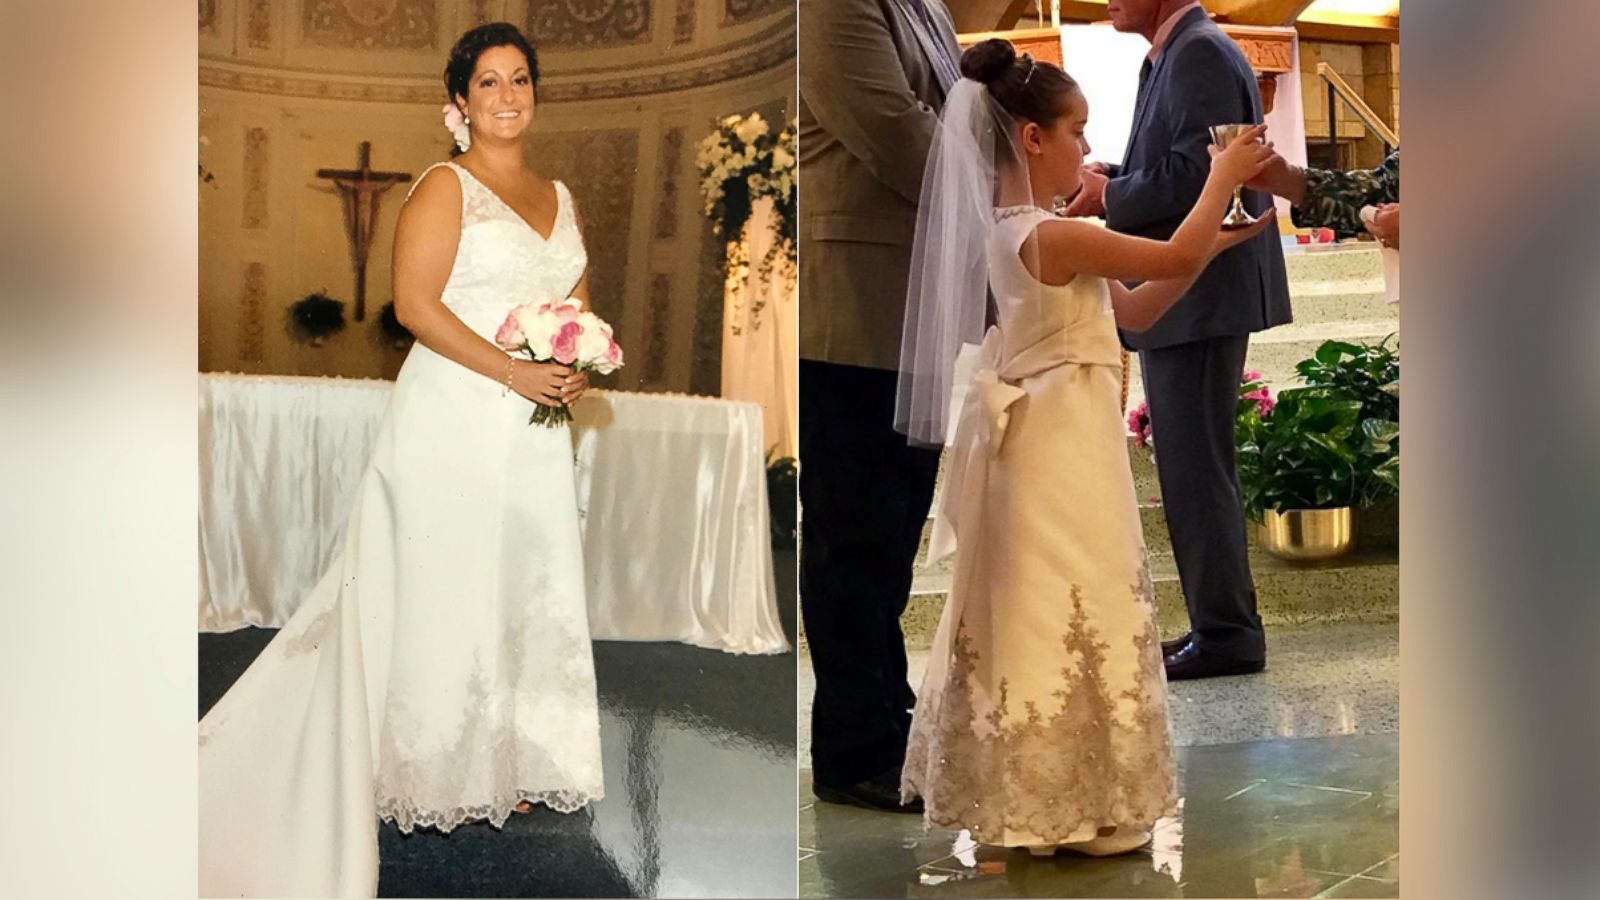 Girl wears First Communion dress made from mom's wedding gown